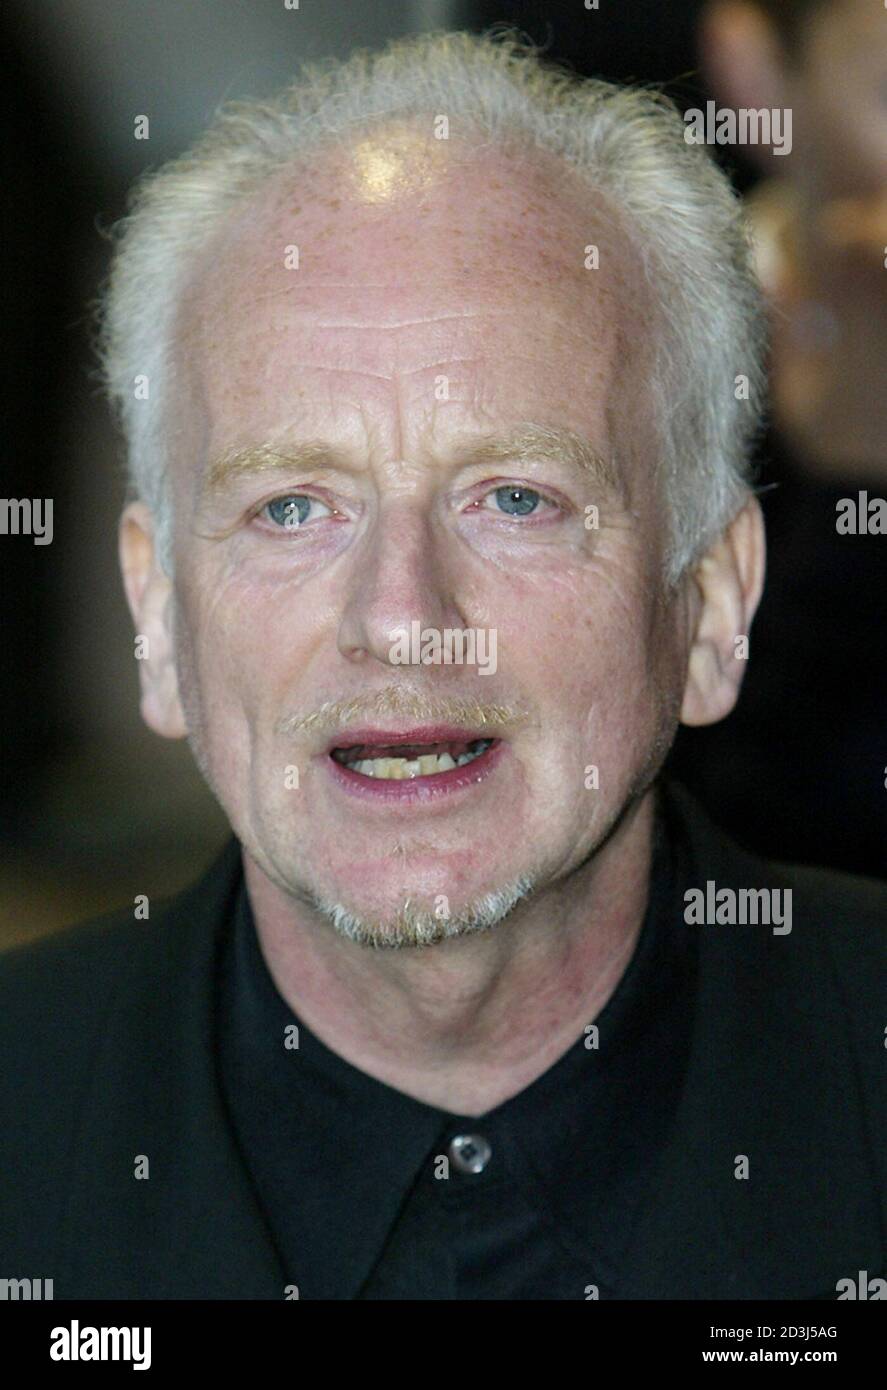 Scottish actor Ian McDiarmid, who plays Emperor Palpatine, arrives for the premiere of the new Star Wars film 'Episode II Attack of the Clones' May 14, 2002.  [The new film, directed by American George Lucas, also stars British actor Ewan McGregor and American Samuel L Jackson.] Stock Photo